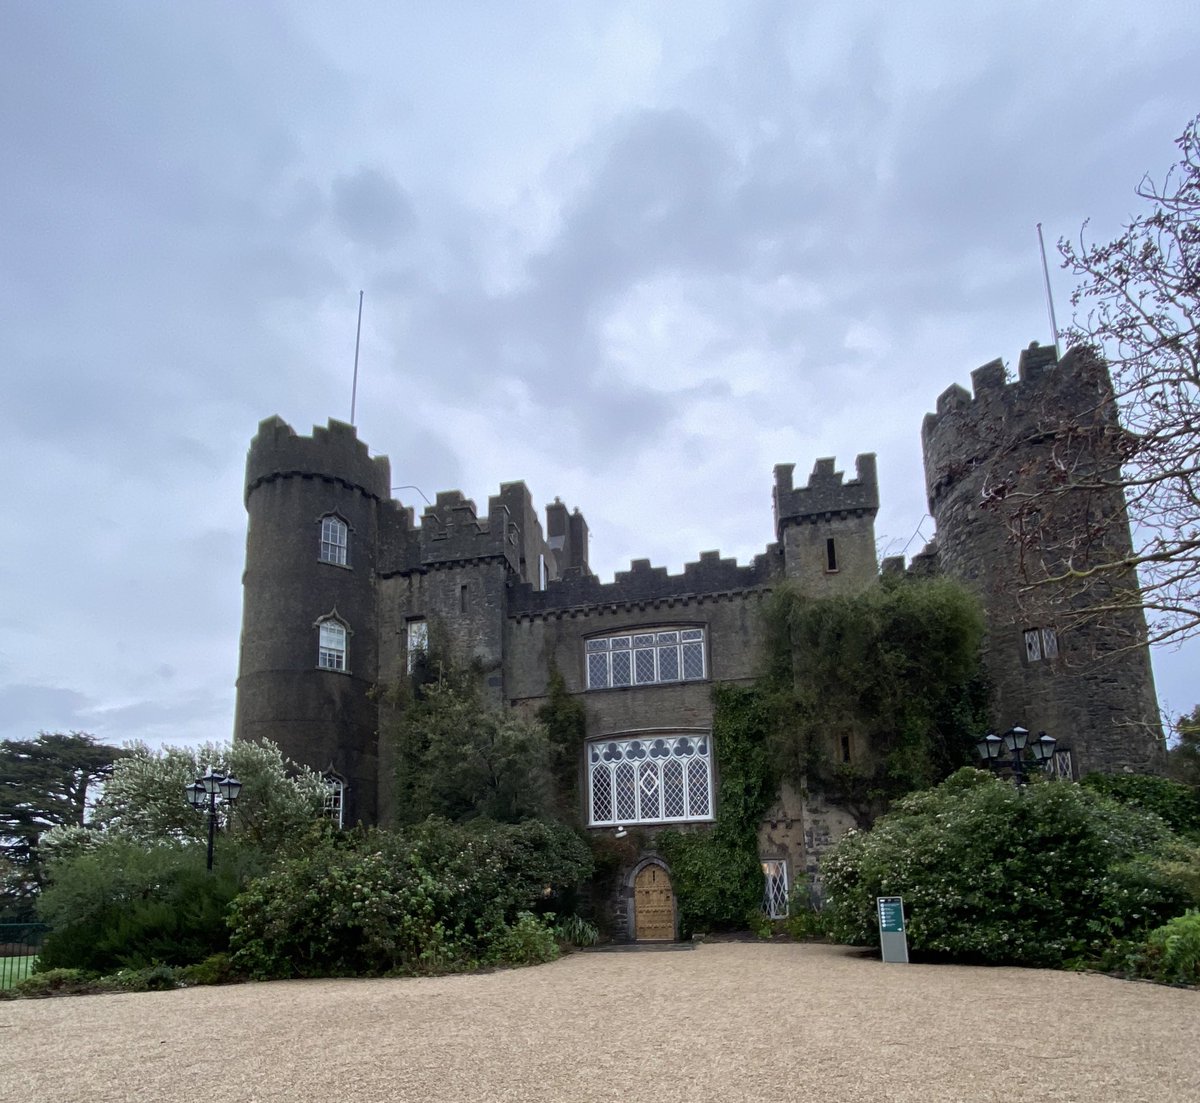 Got blown around @MalahideCastleG for today’s walk! “All truly great thoughts are conceived by walking.” – Friedrich Nietzsche #100daysofwalking